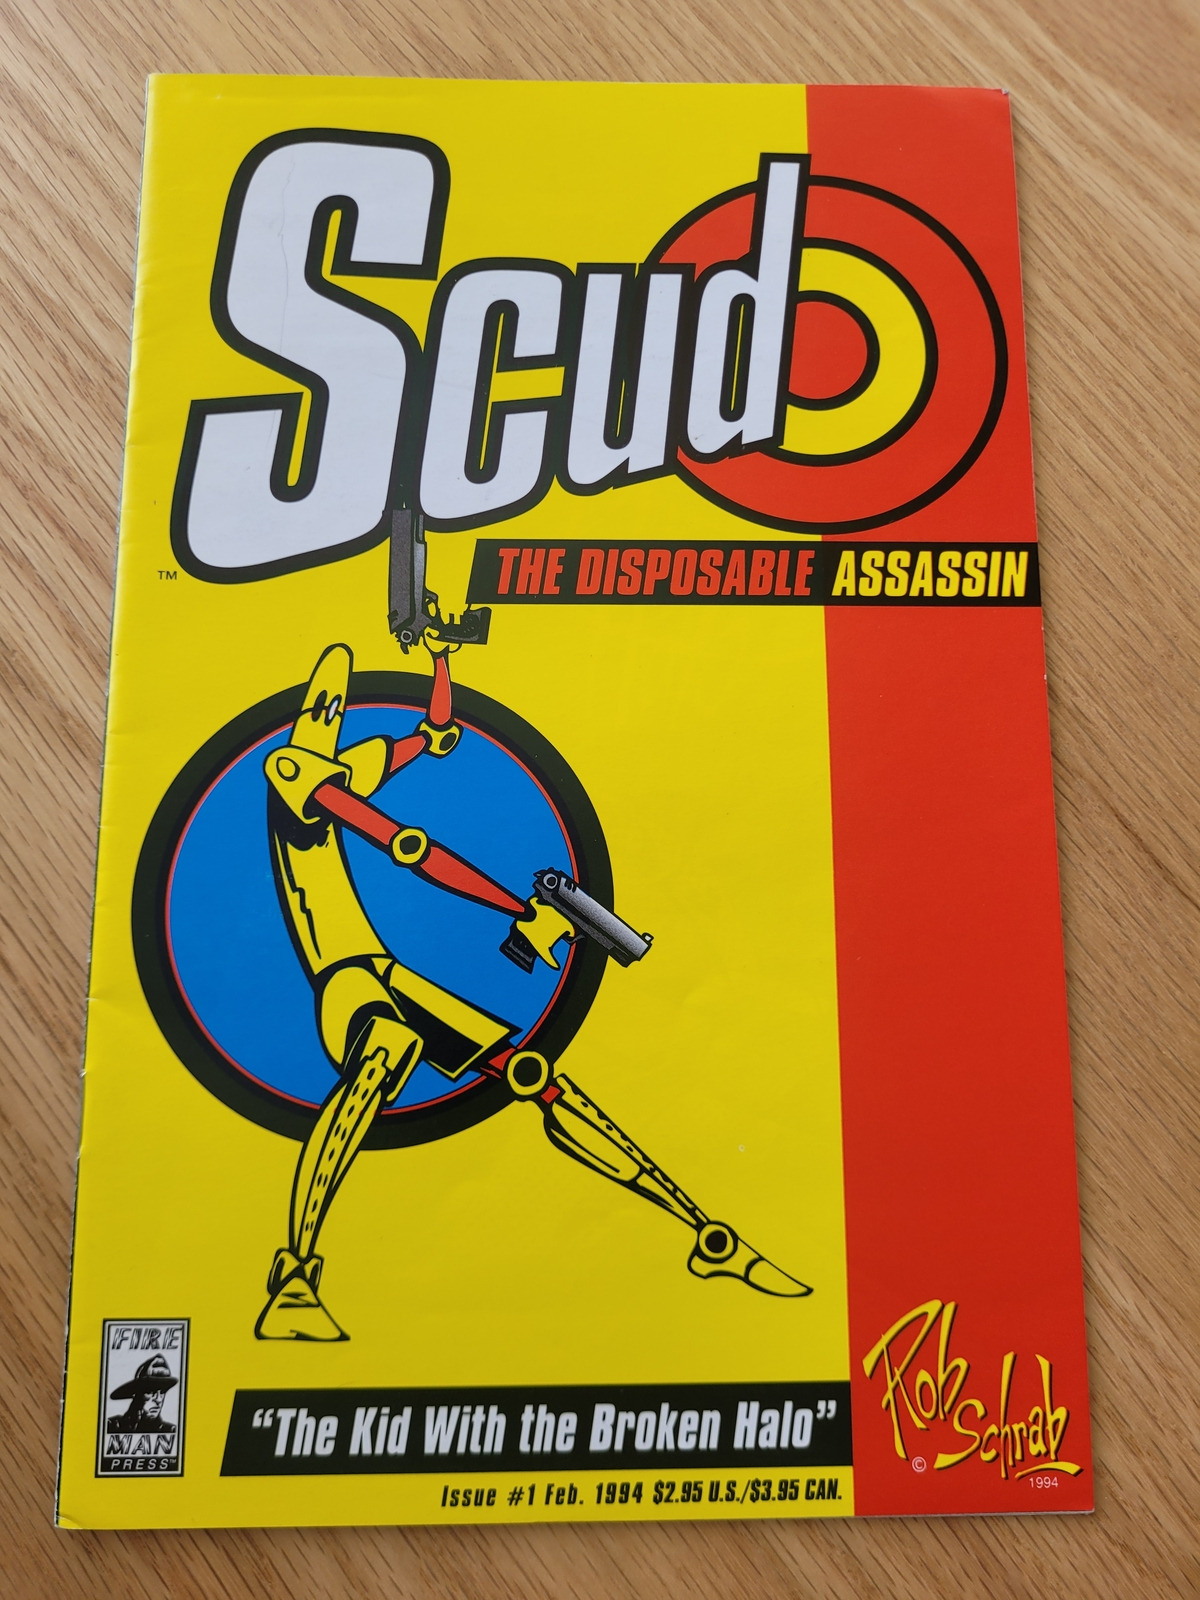 Scud the Disposable Assassin #1 (1994)